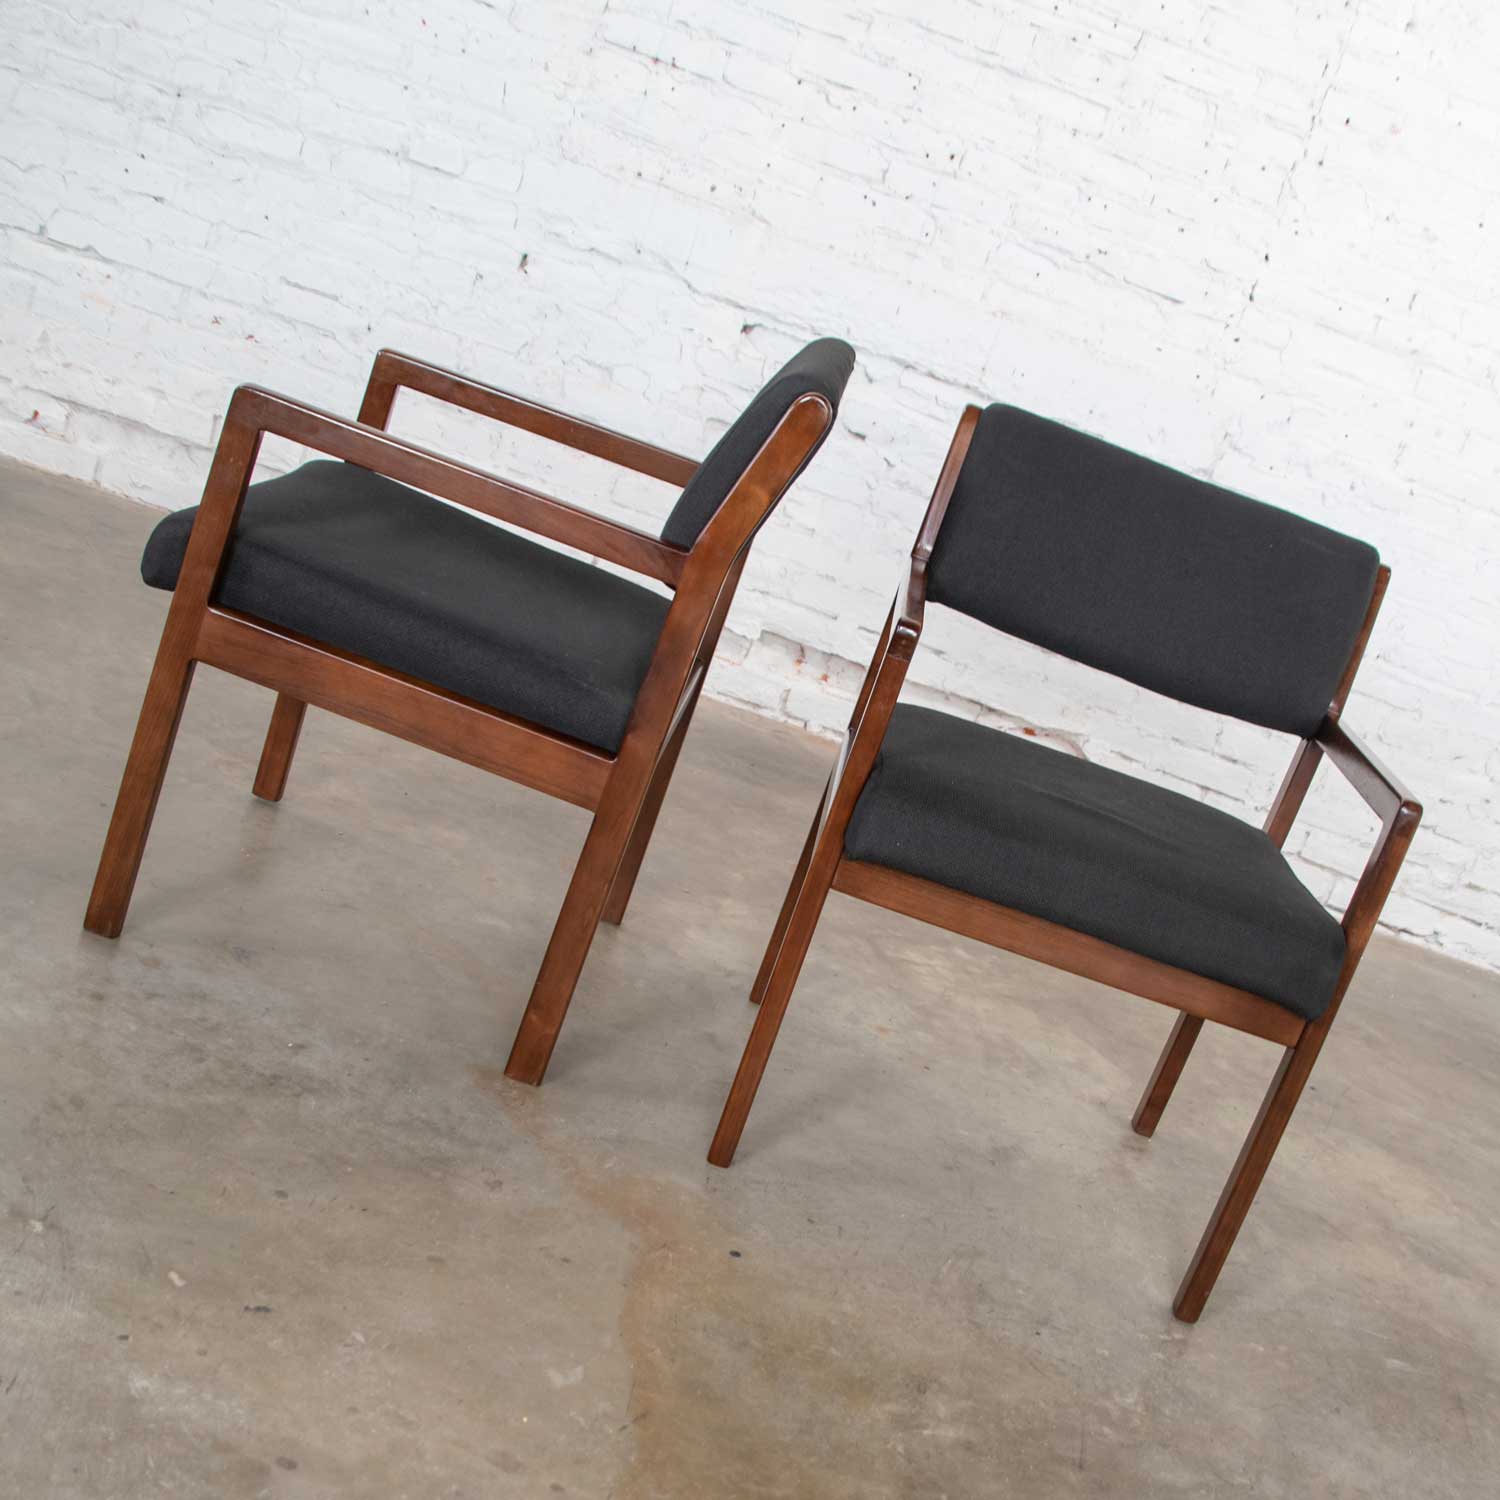 Modern Pair Black & Walnut Tone Wood Accent or Dining Armchairs by Haworth